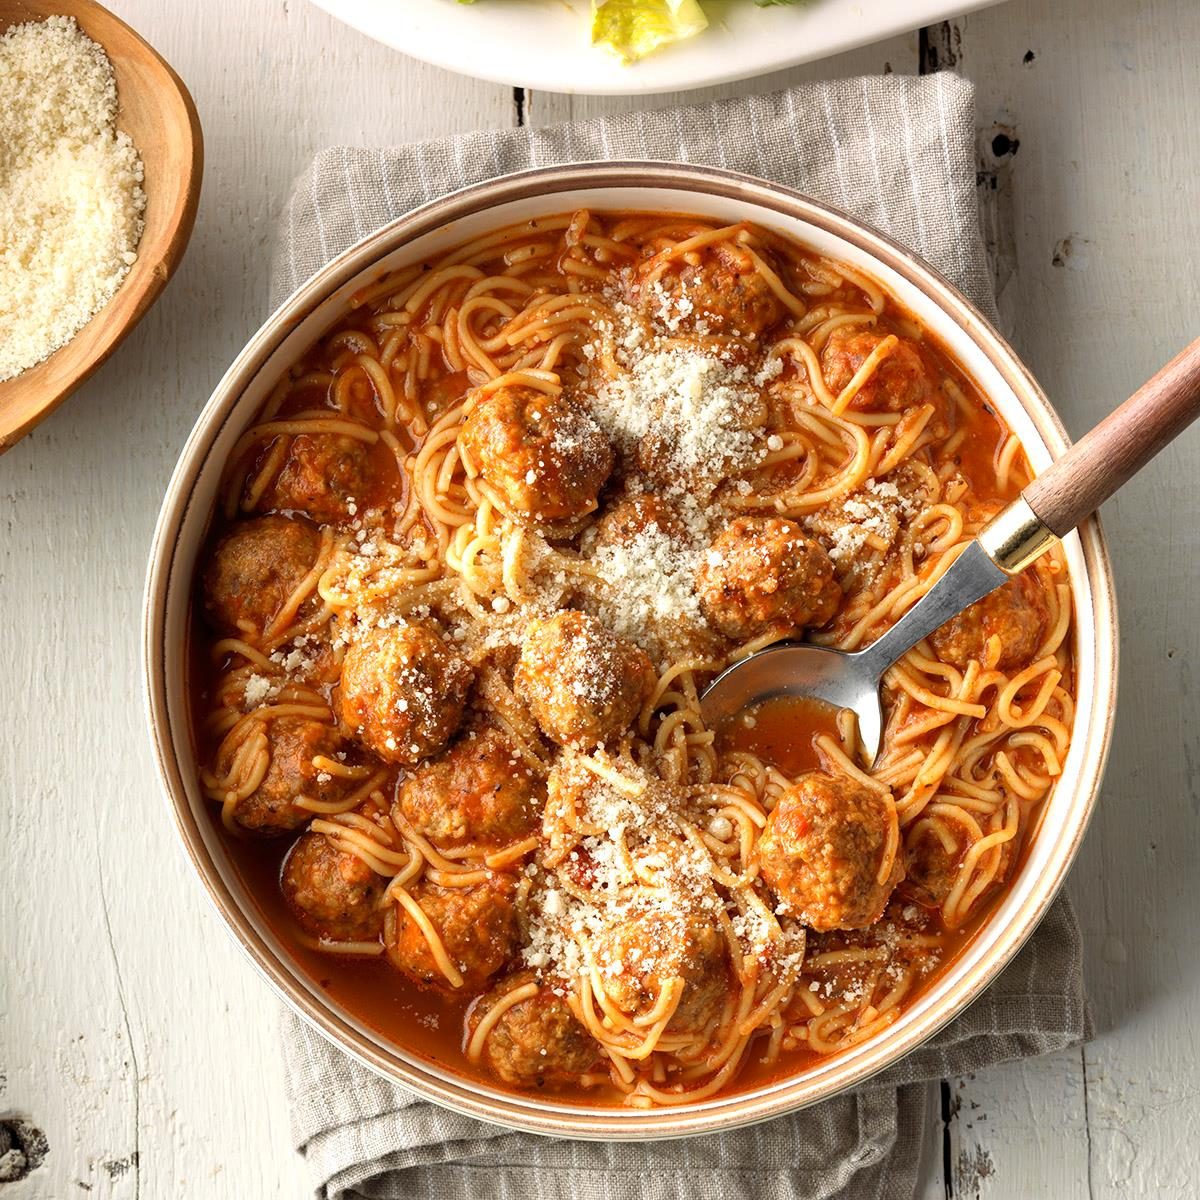 favourite slow cooker recipes - Spaghetti and meatball soup recipe